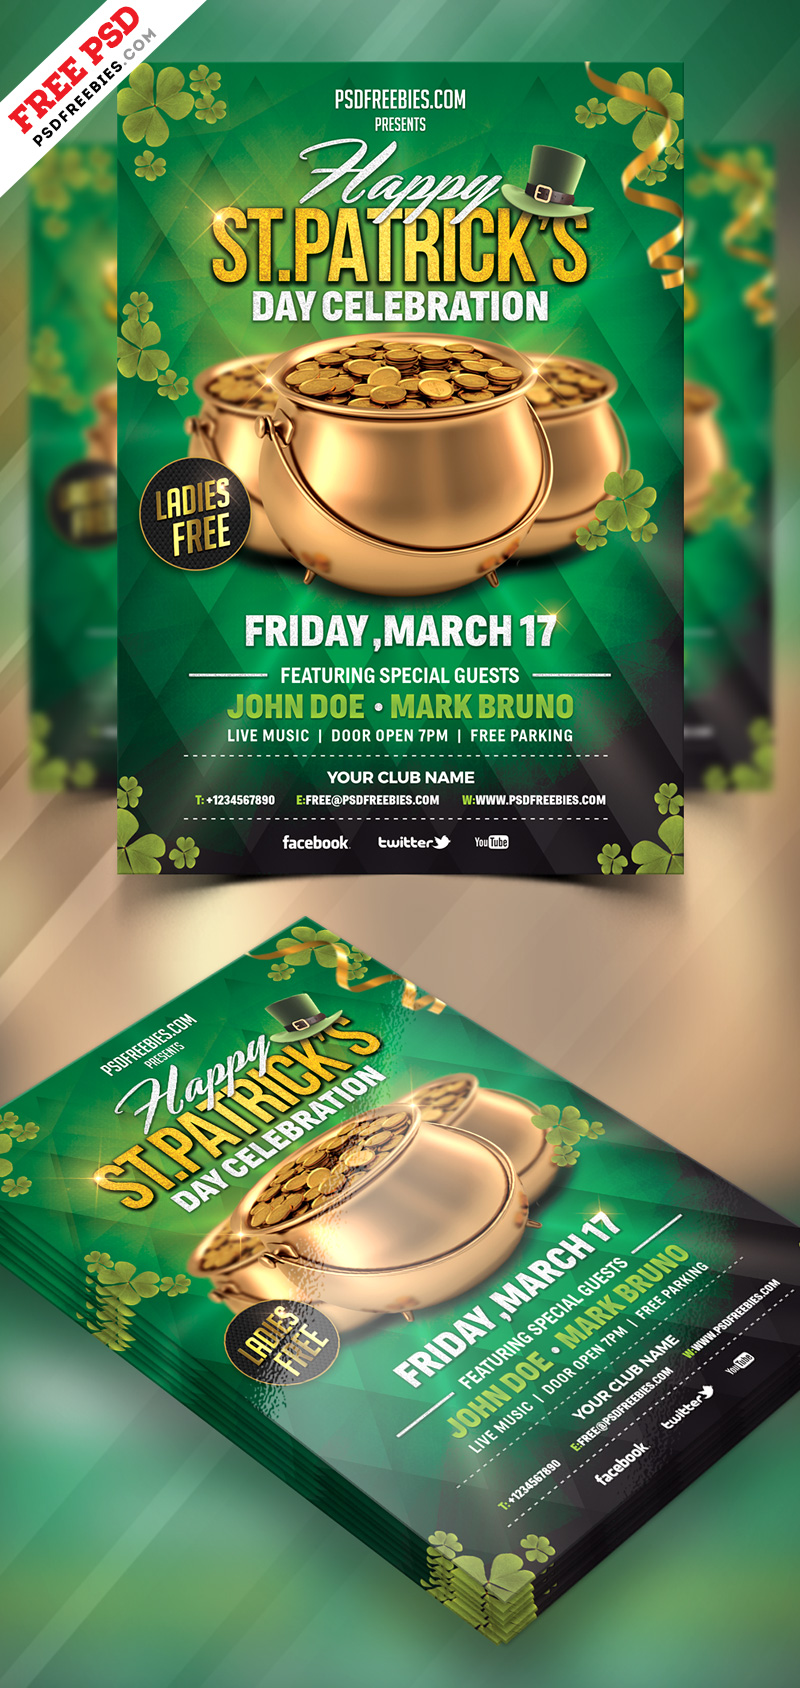 Download the St. Patrick's Day Free Flyer Template for Photoshop